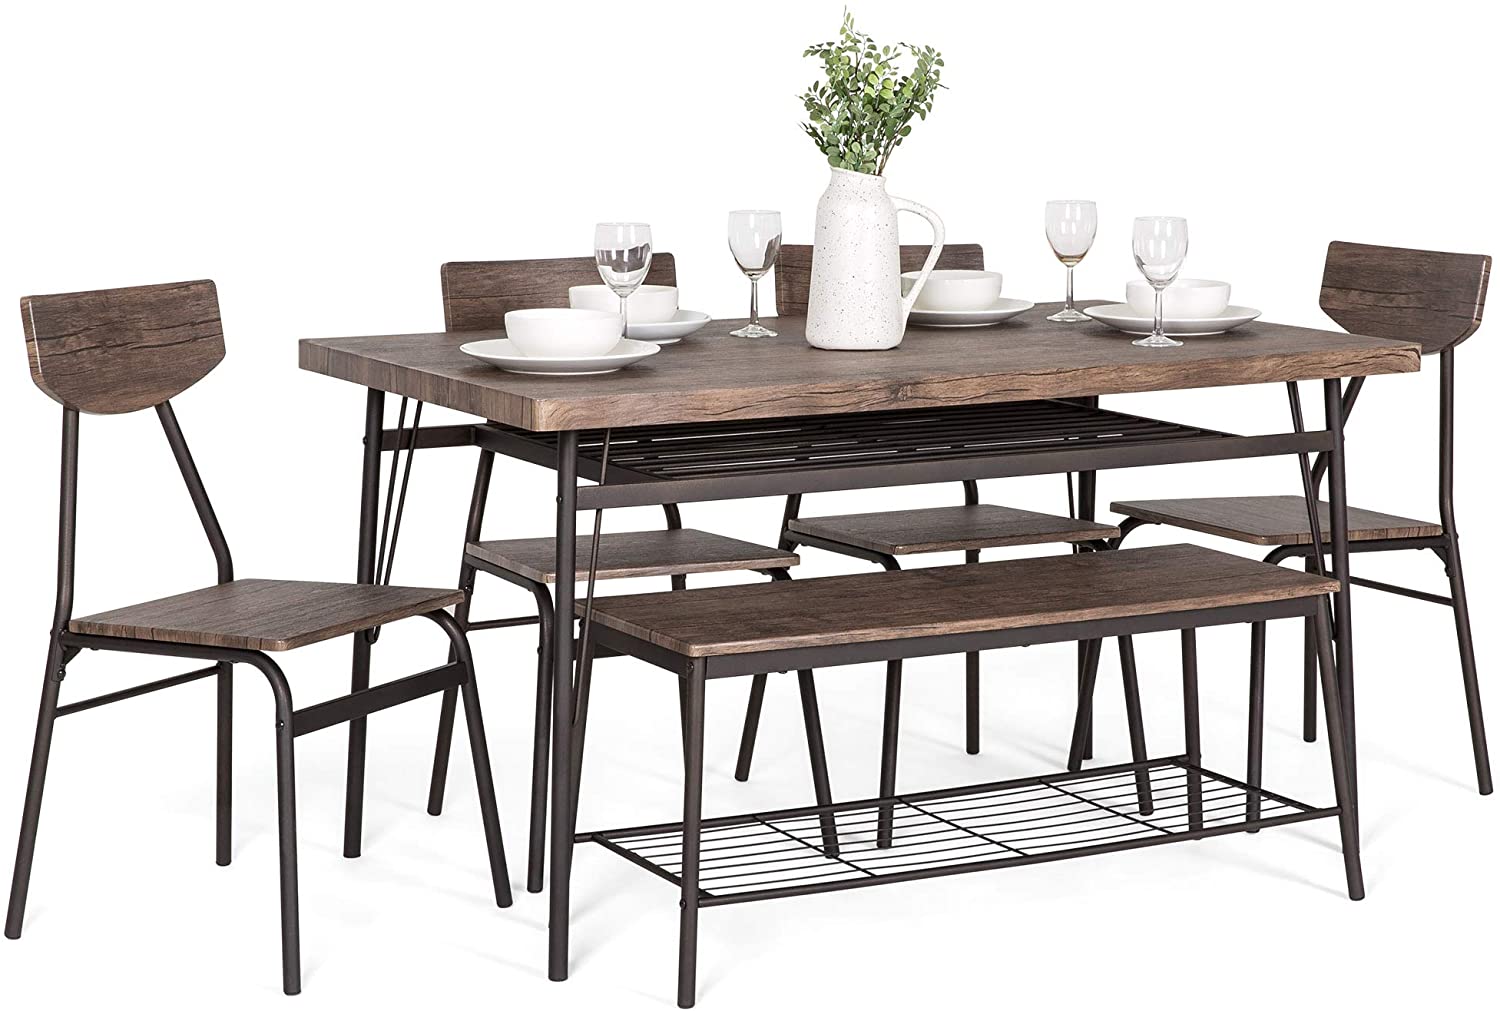 Best Choice Products 6-Piece 55in Modern Home Dining Set w/Storage Racks, Rectangular Table, Bench, 4 Chairs - Brown